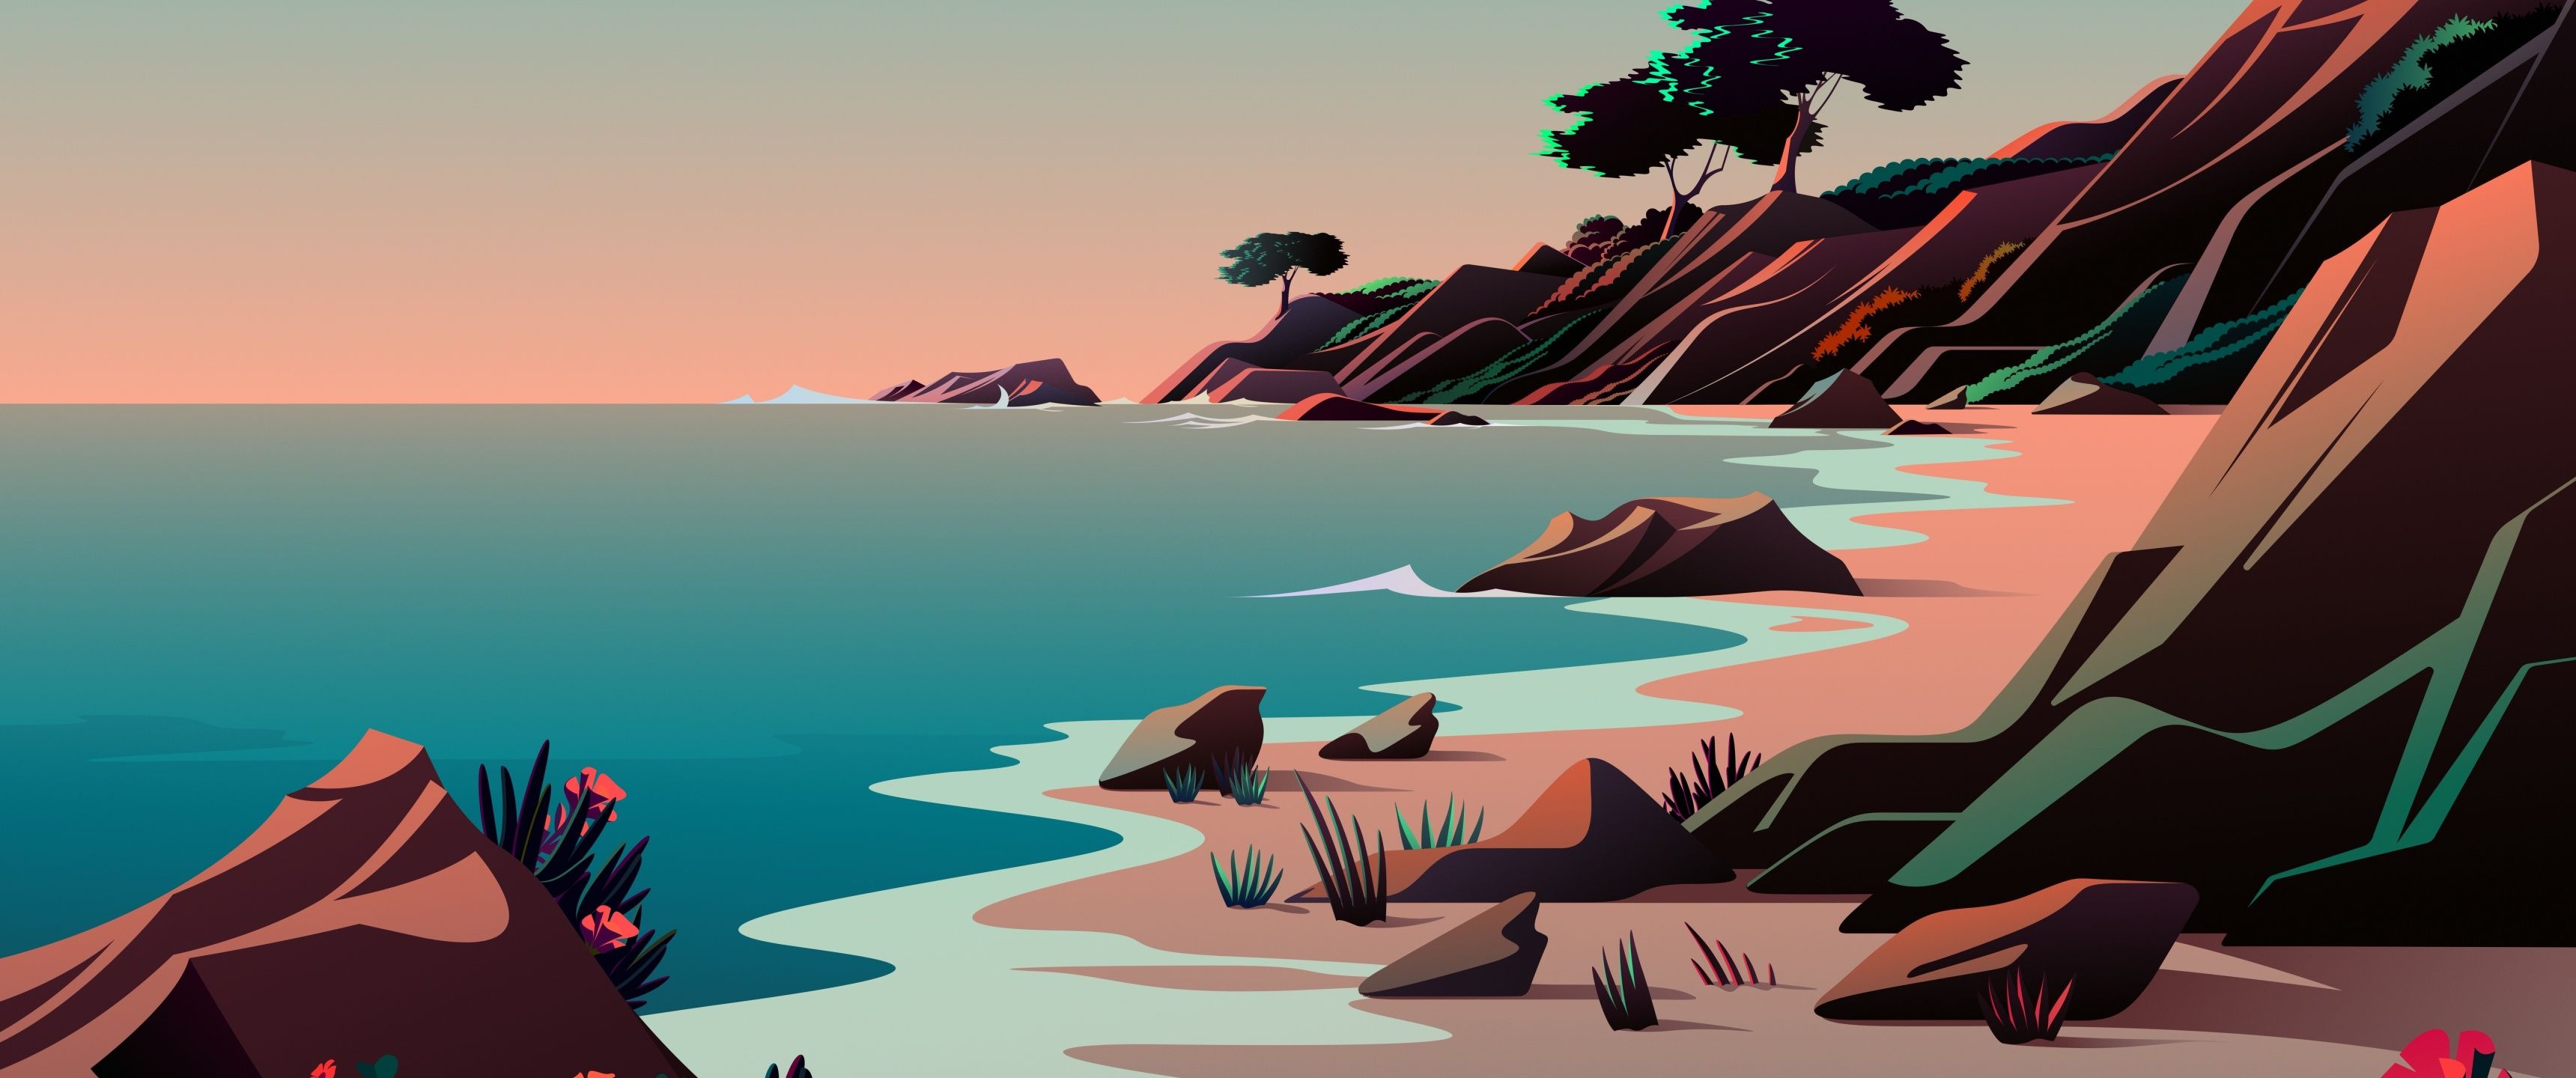 A digital painting of a beach with a stream flowing into the ocean. - 3440x1440, illustration